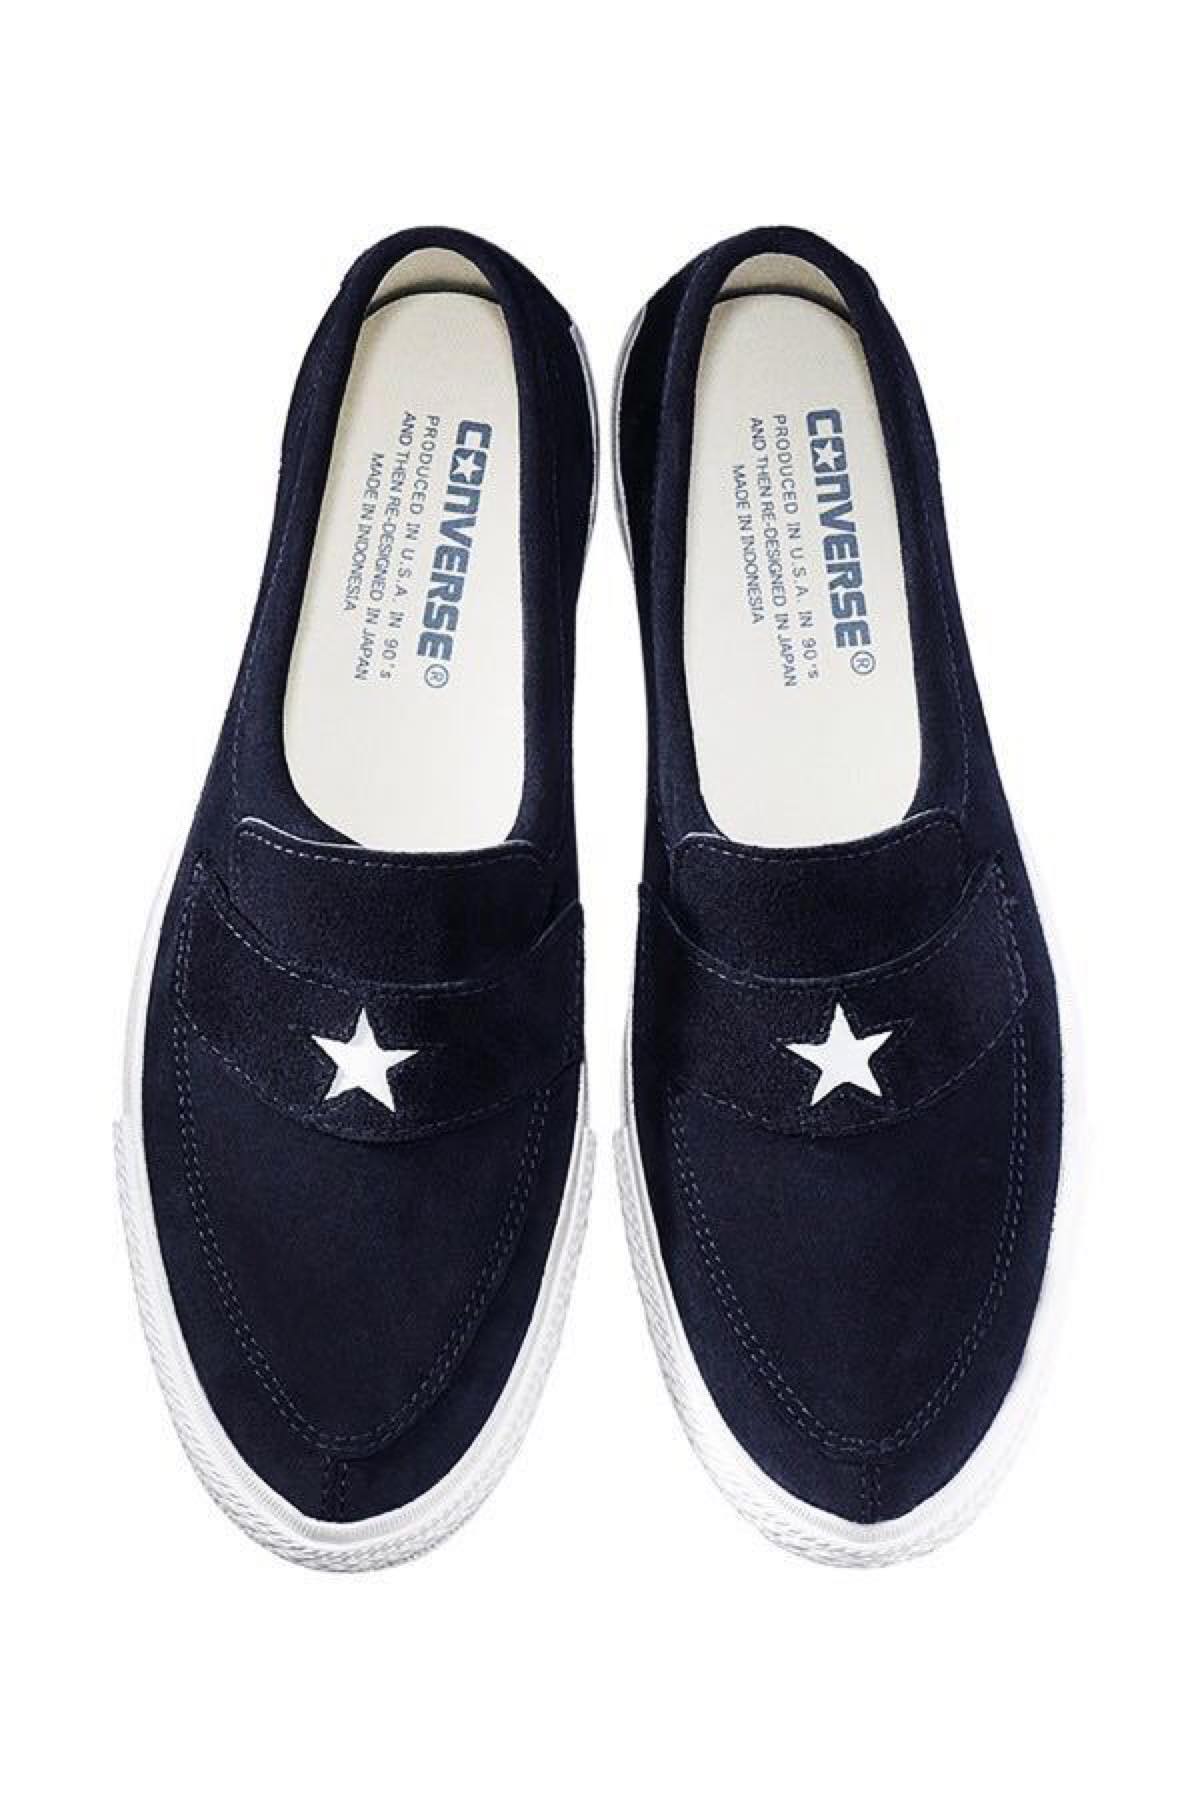 265cmCONVERSE ADDICT ONE STAR LOAFER 26.5cm